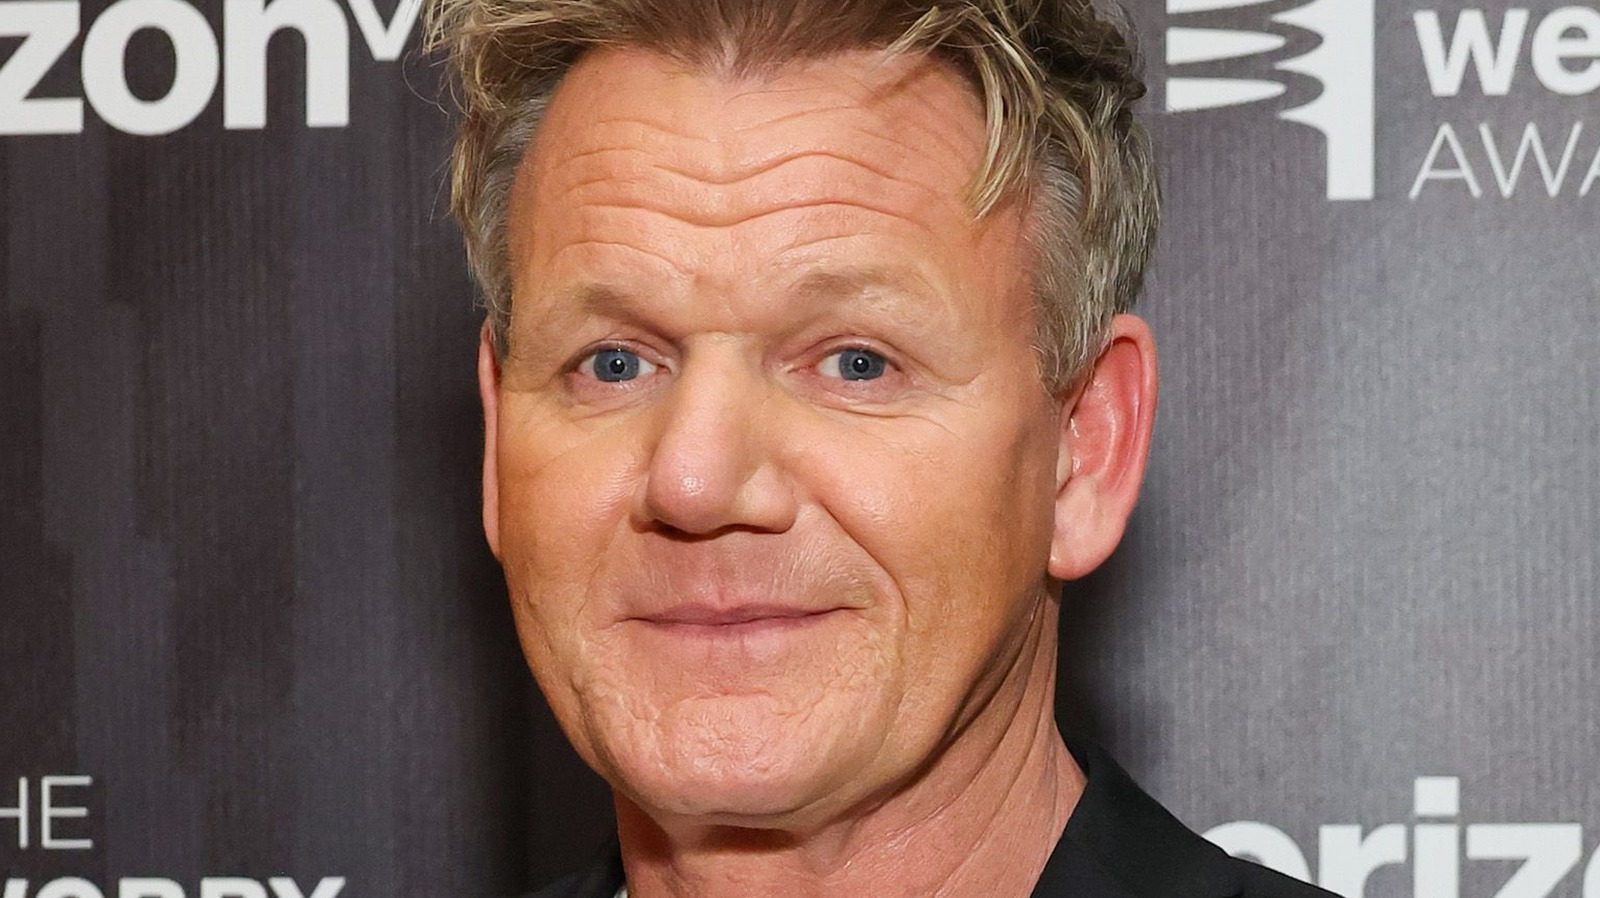 What Brands of Cookware Does Gordon Ramsay Use: Uncover His